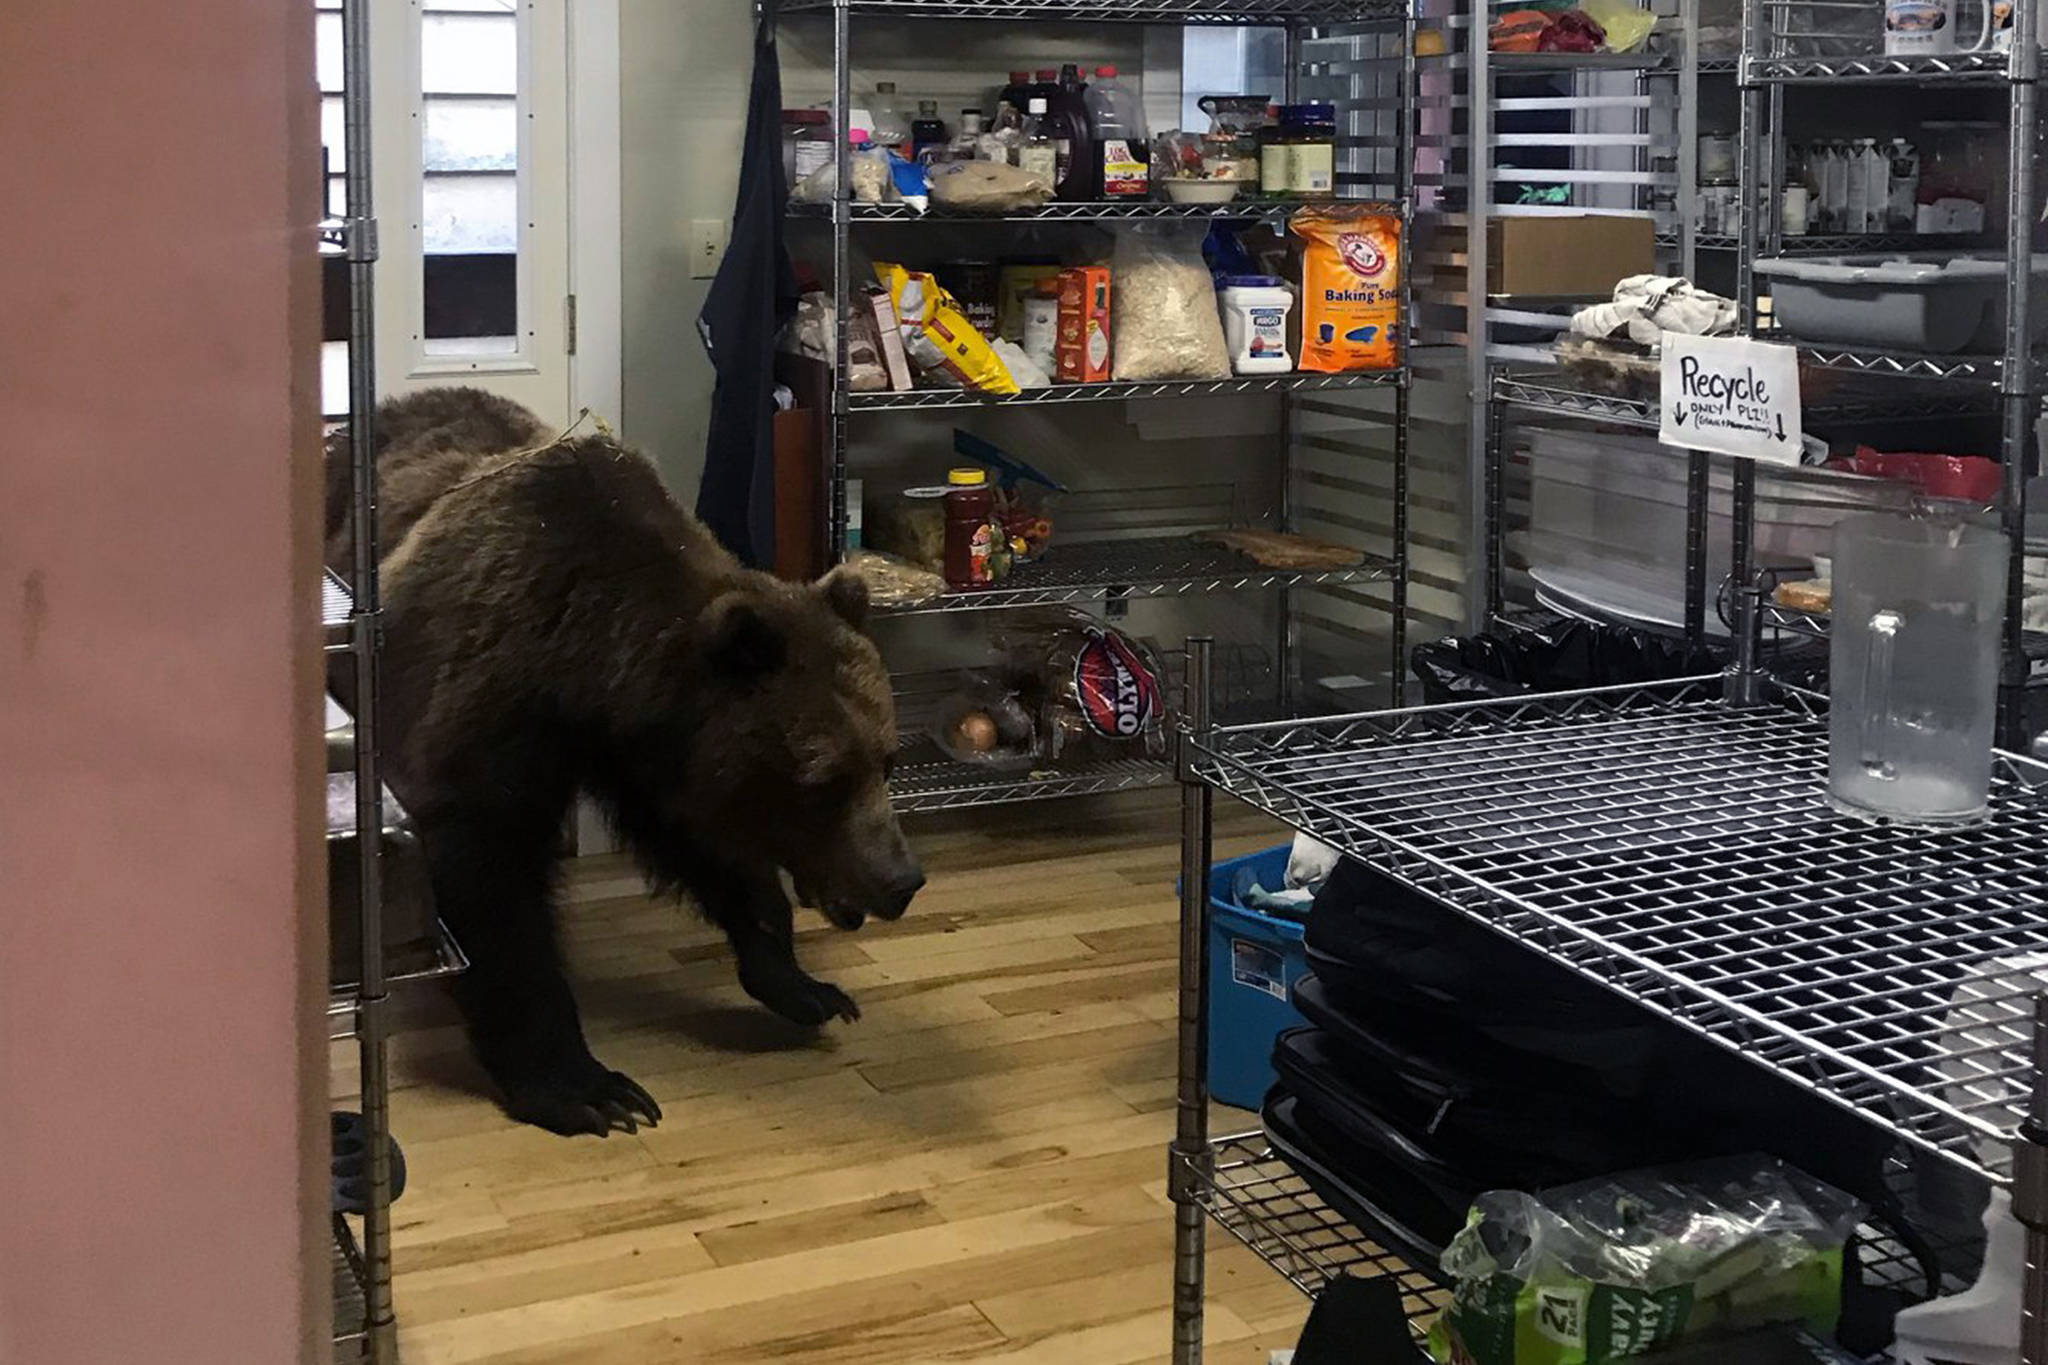 Brown bear scare: Hungry bear walks into lodge, has to be put down